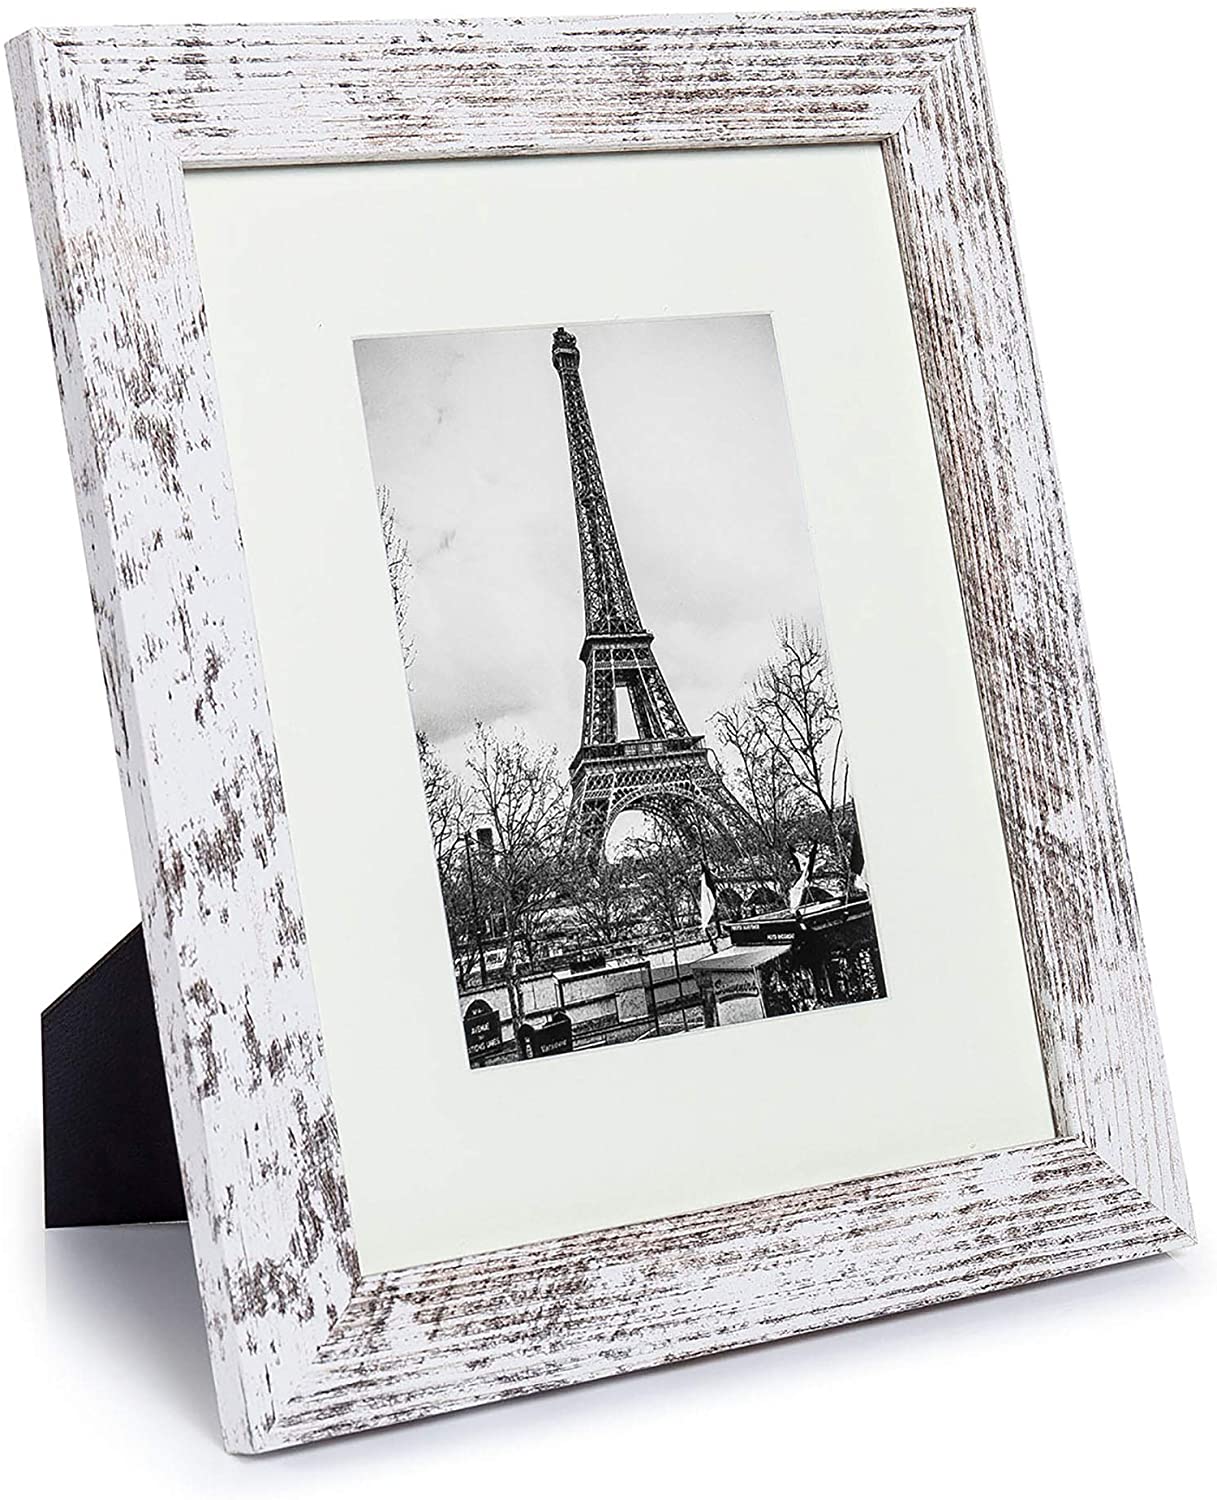 upsimples 4x6 Picture Frame Distressed Grey with Real Glass, Display P –  Upsimples Direct